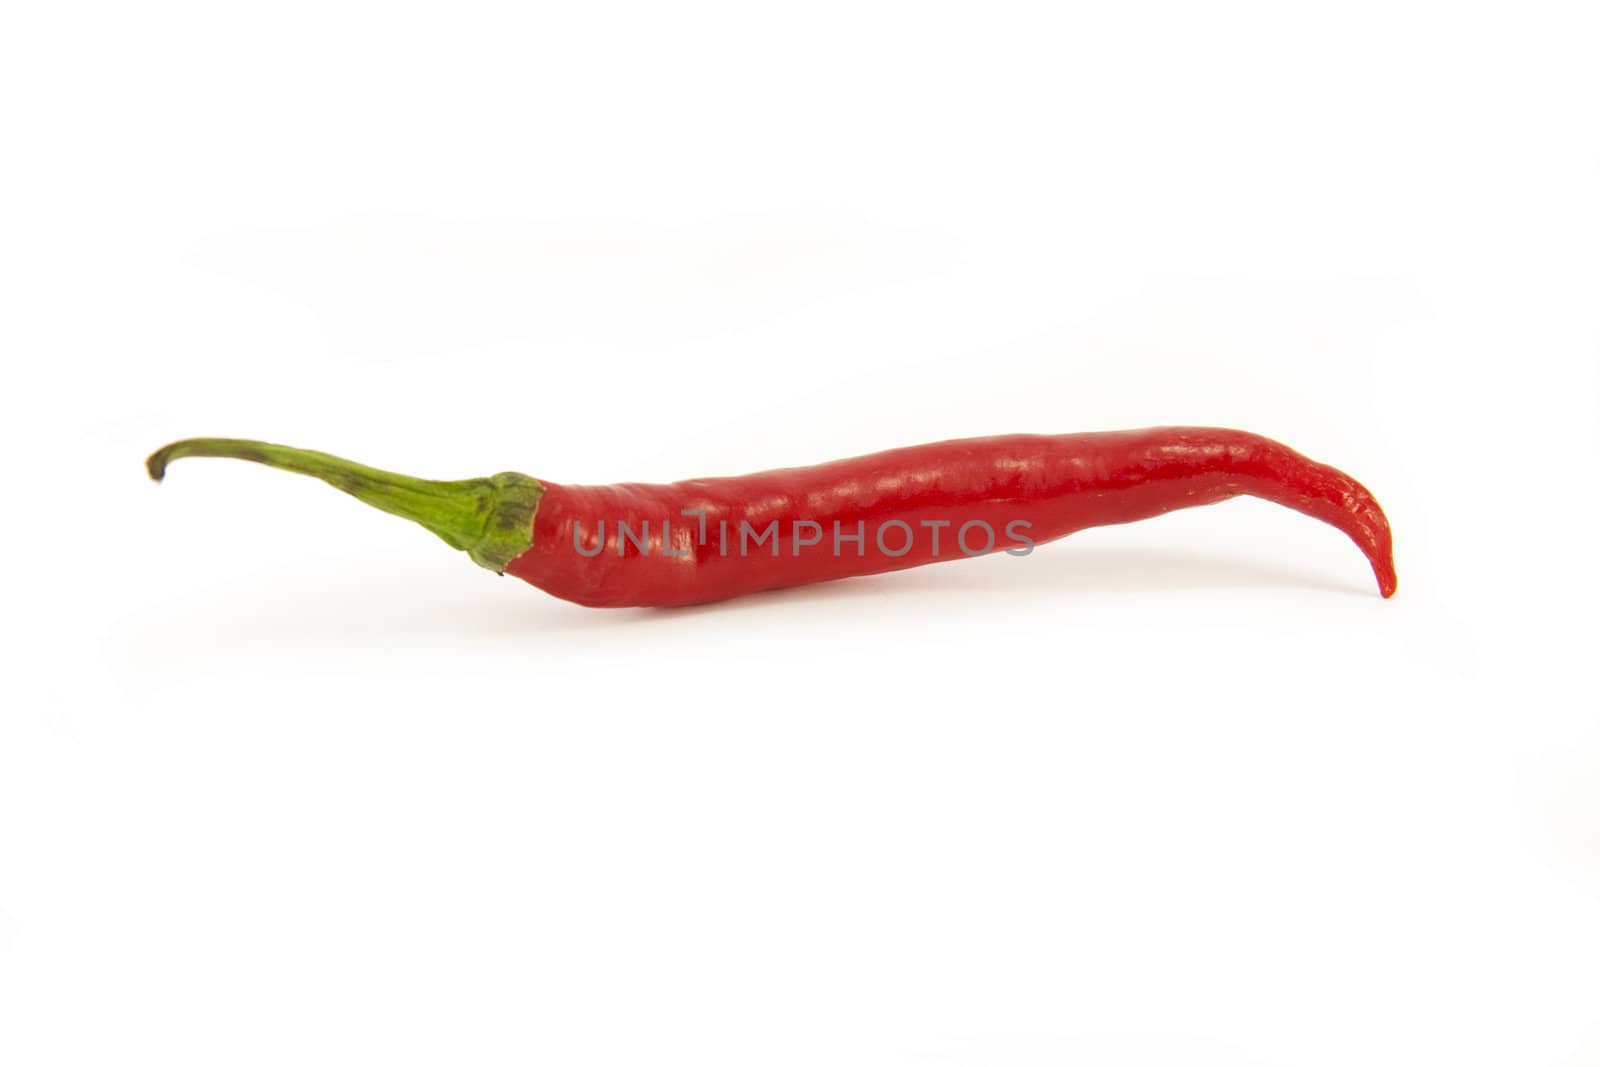 A whole fresh red chili on a white background